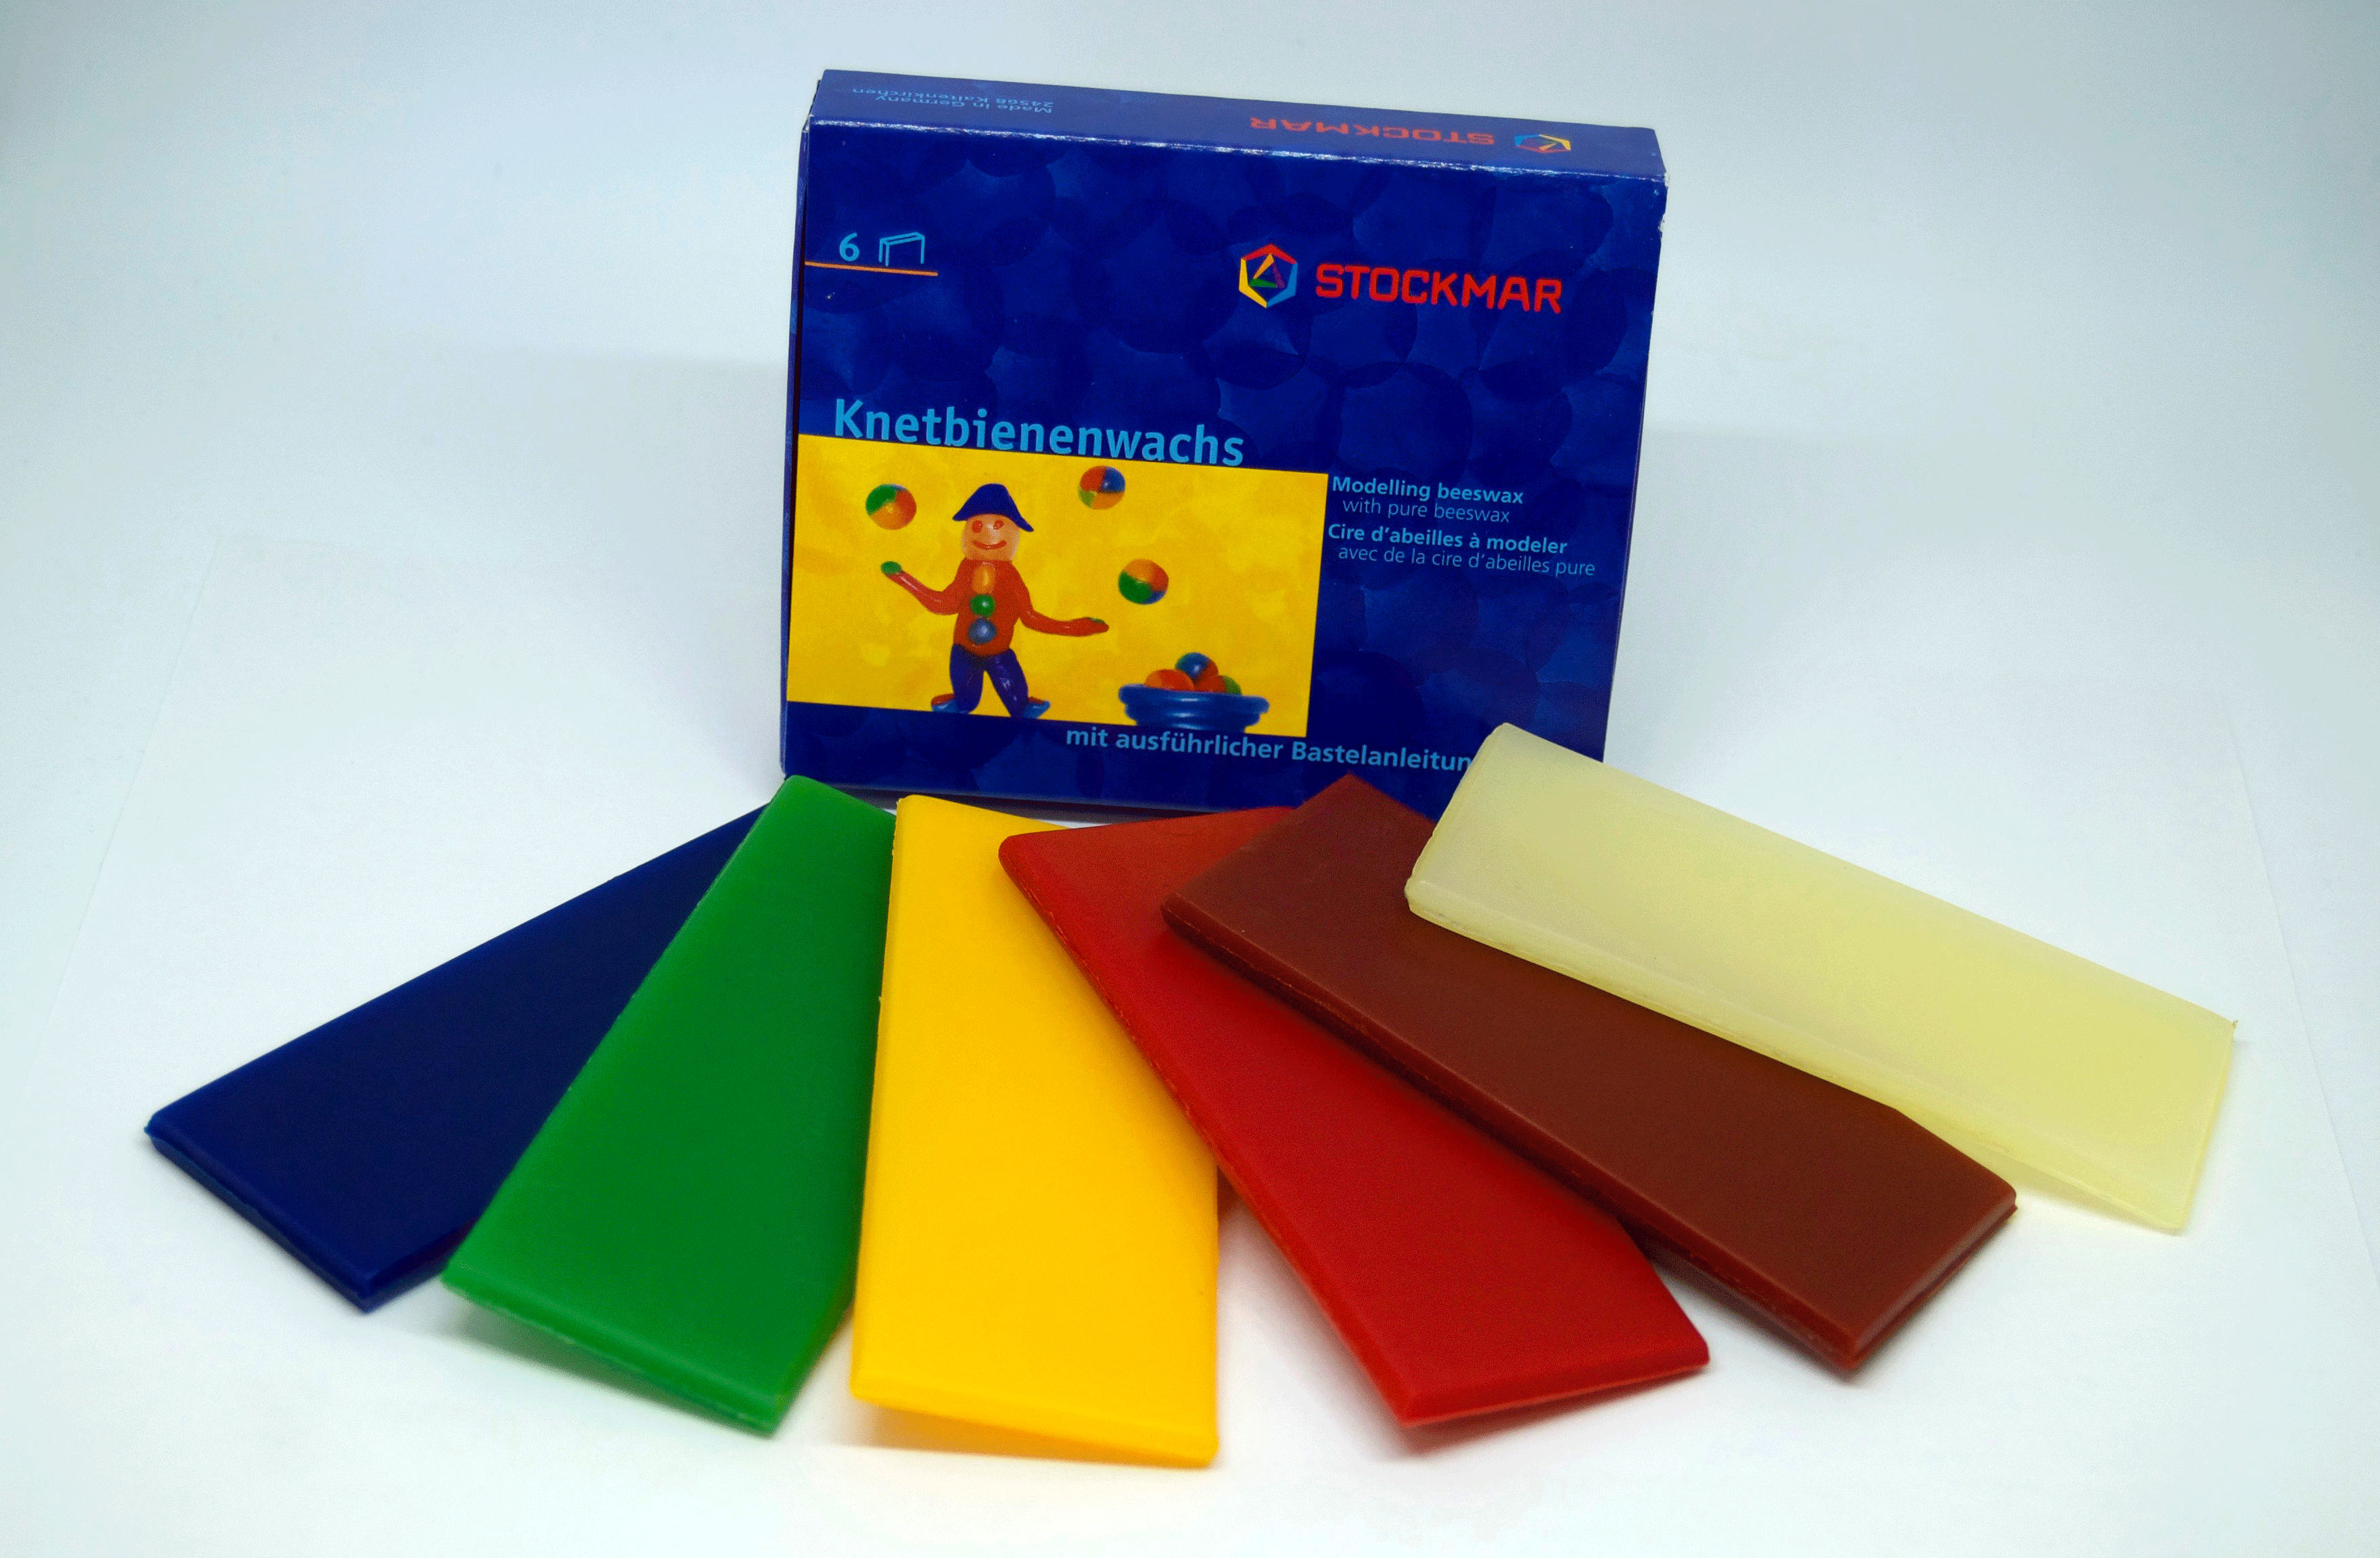 Stockmar Modelling Beeswax - 6 Color Beeswax Sheets Set - For Kids,  Toddlers, and Artists looking for Waldorf Organic Art Supplies, Non Toxic  Beeswax